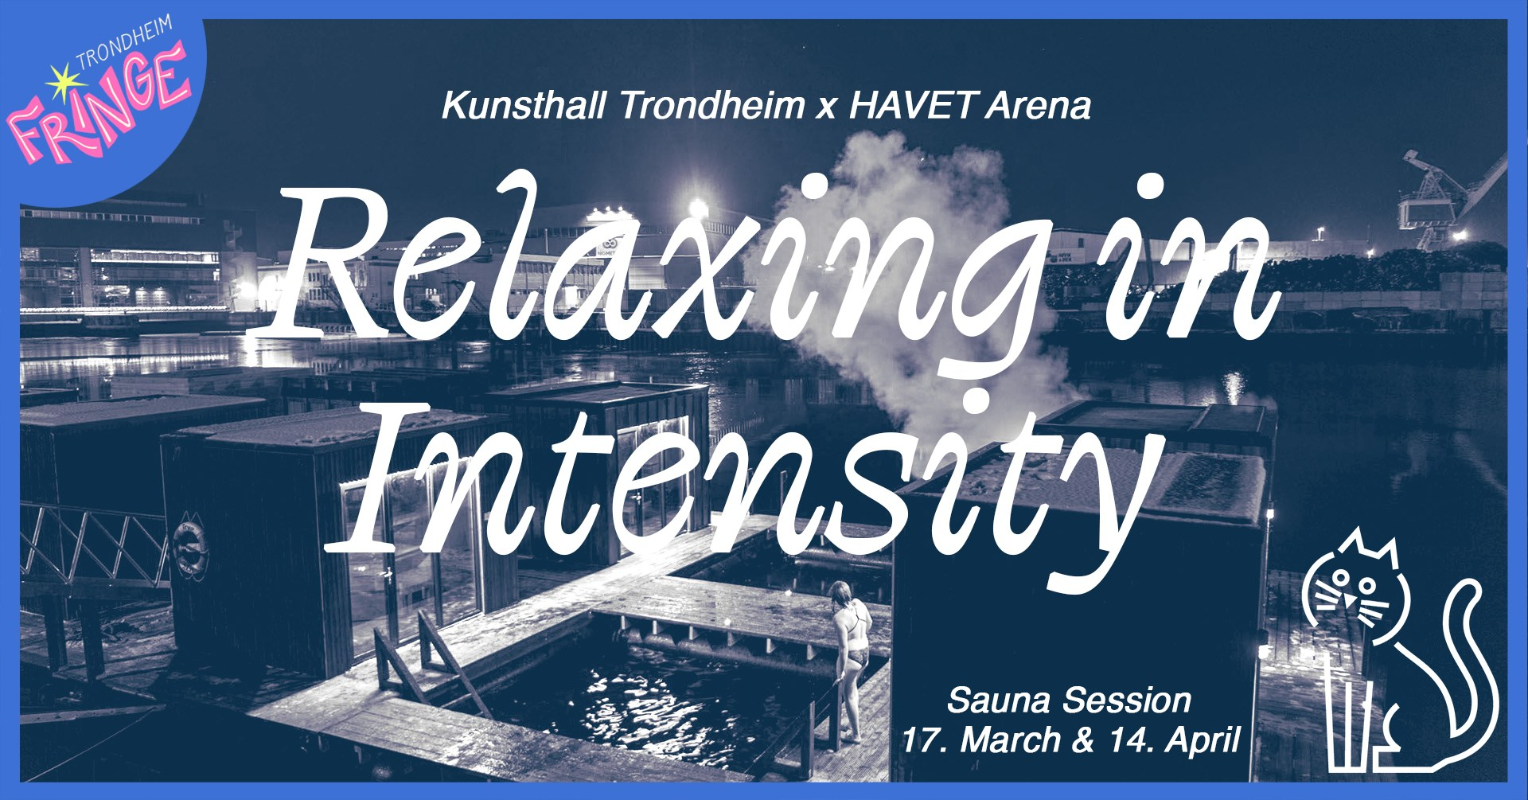 May be an image of text that says 'TRONDHEIM FRNGE Kunsthall Trondheim X HAVET Arena Relaxing in Intensity Sauna Session 17. March & 14. April'